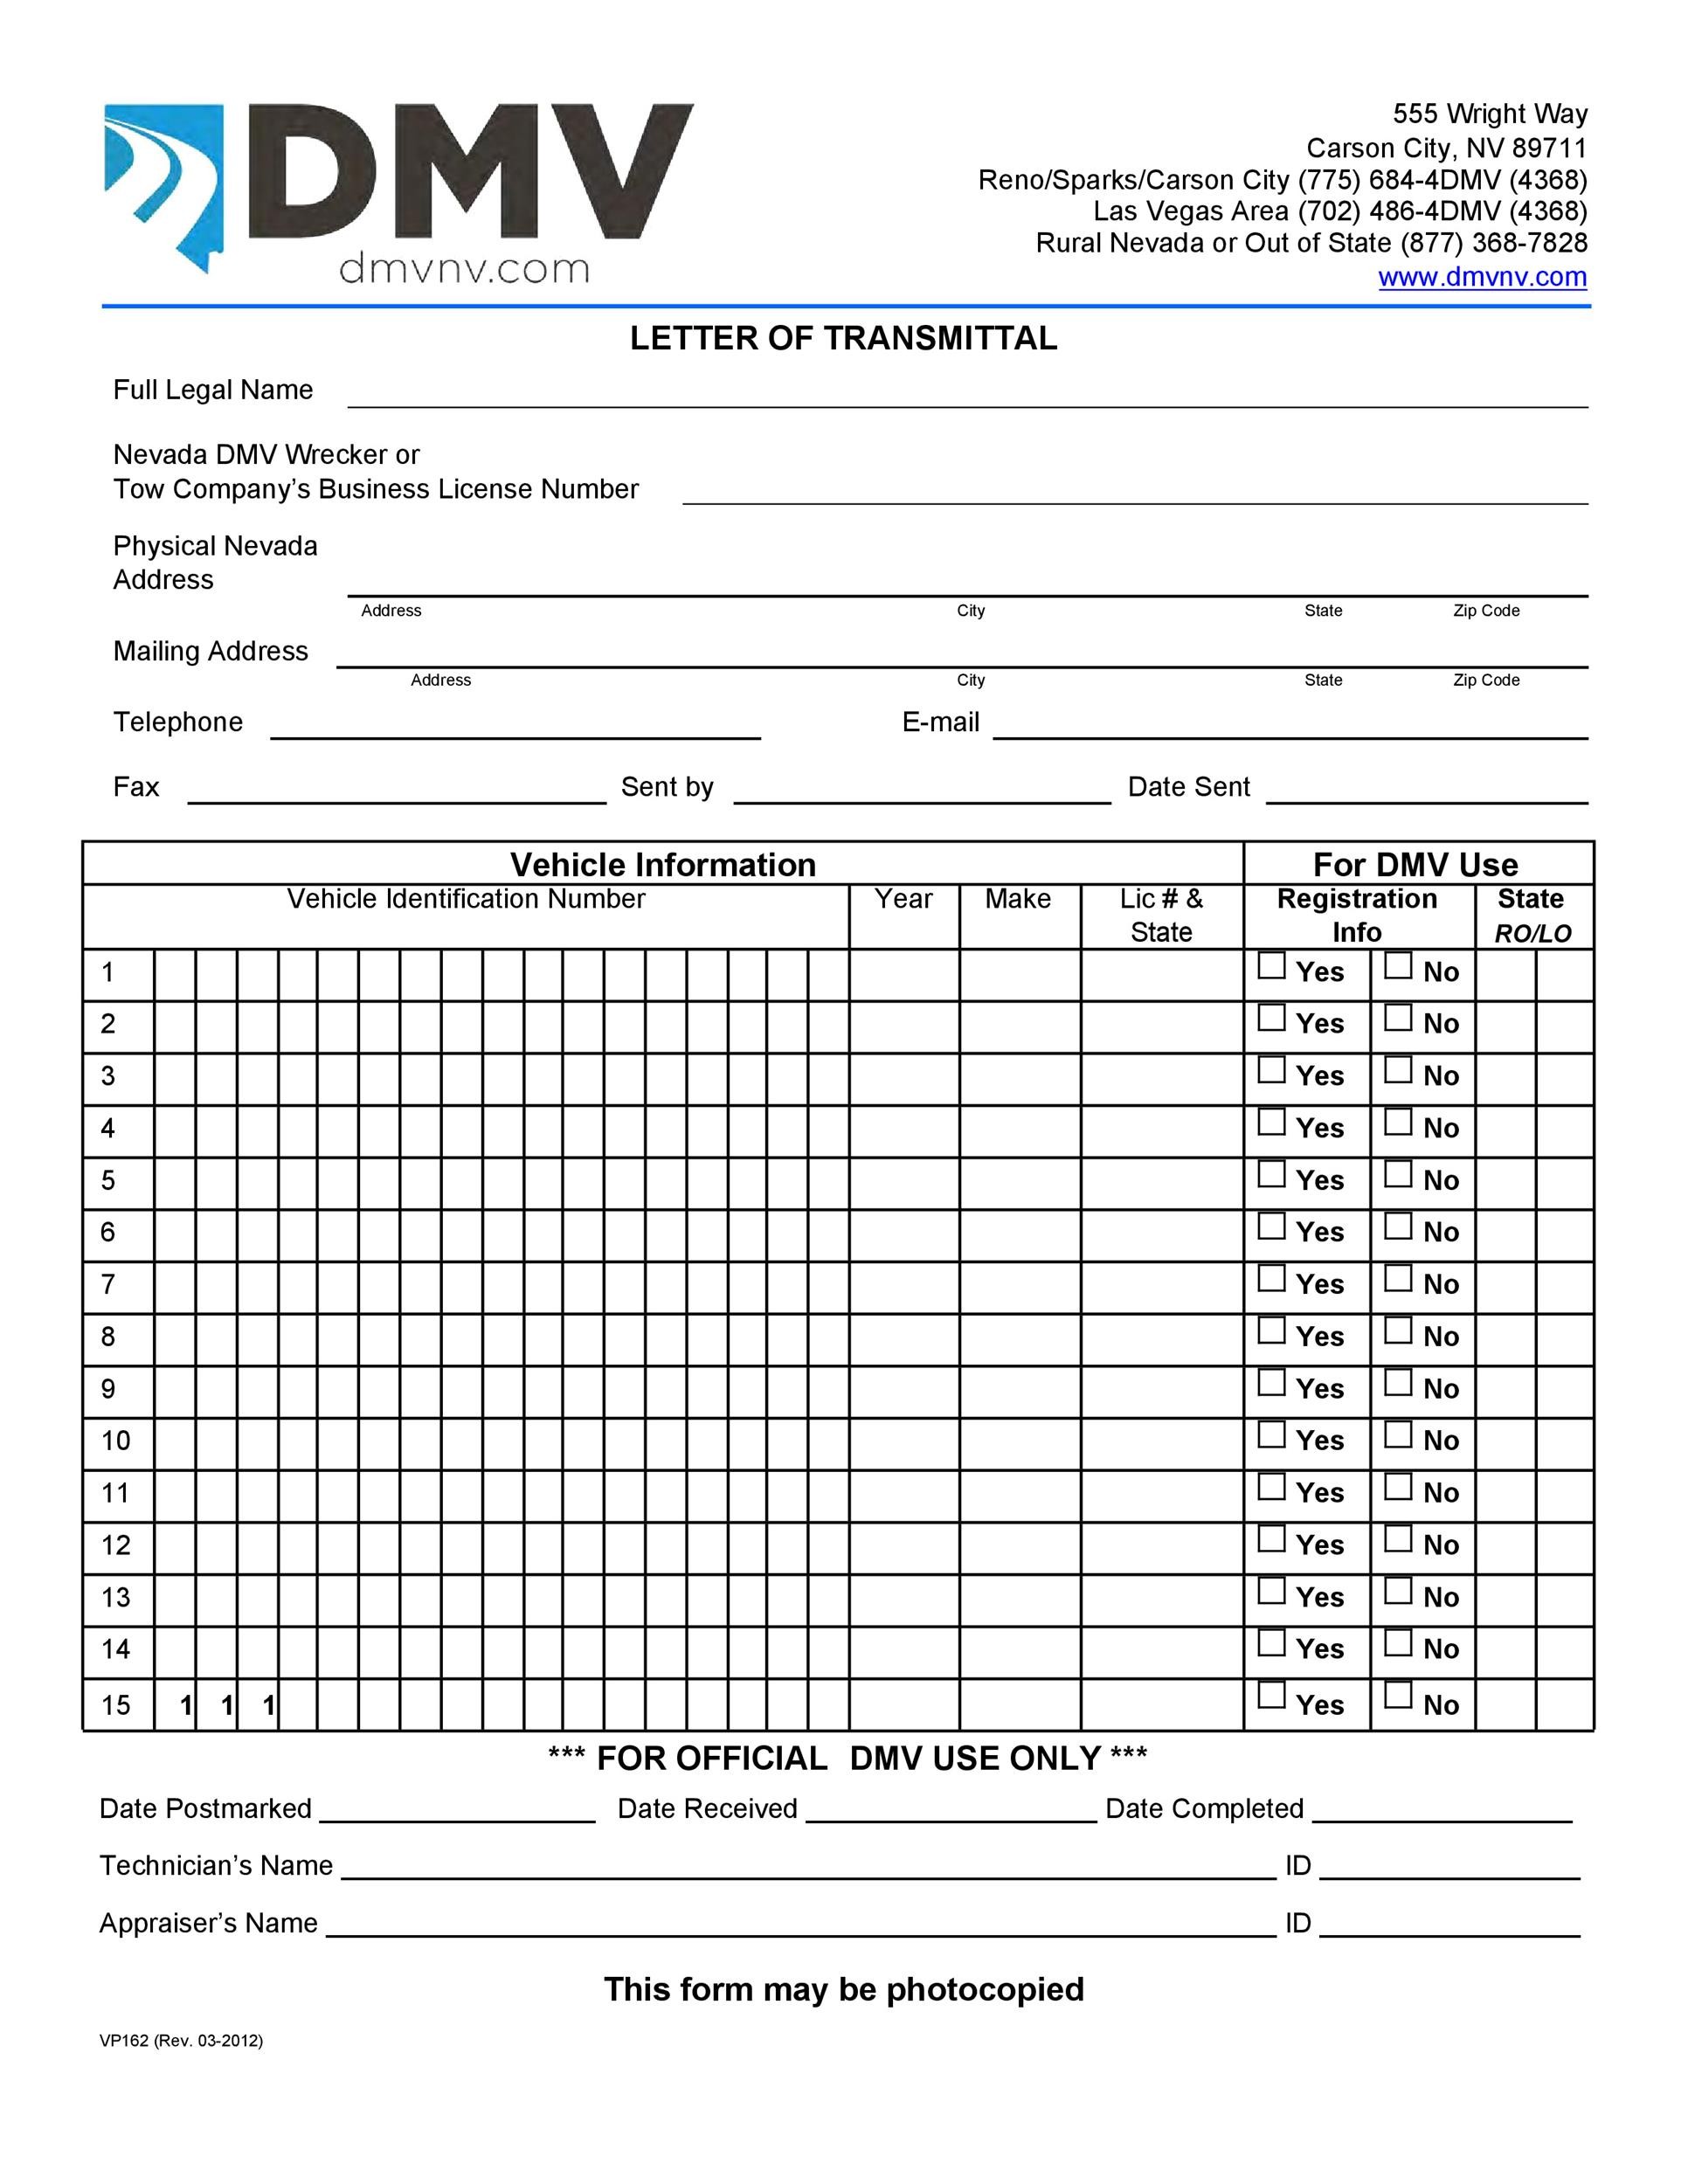 Free letter of transmittal template 17